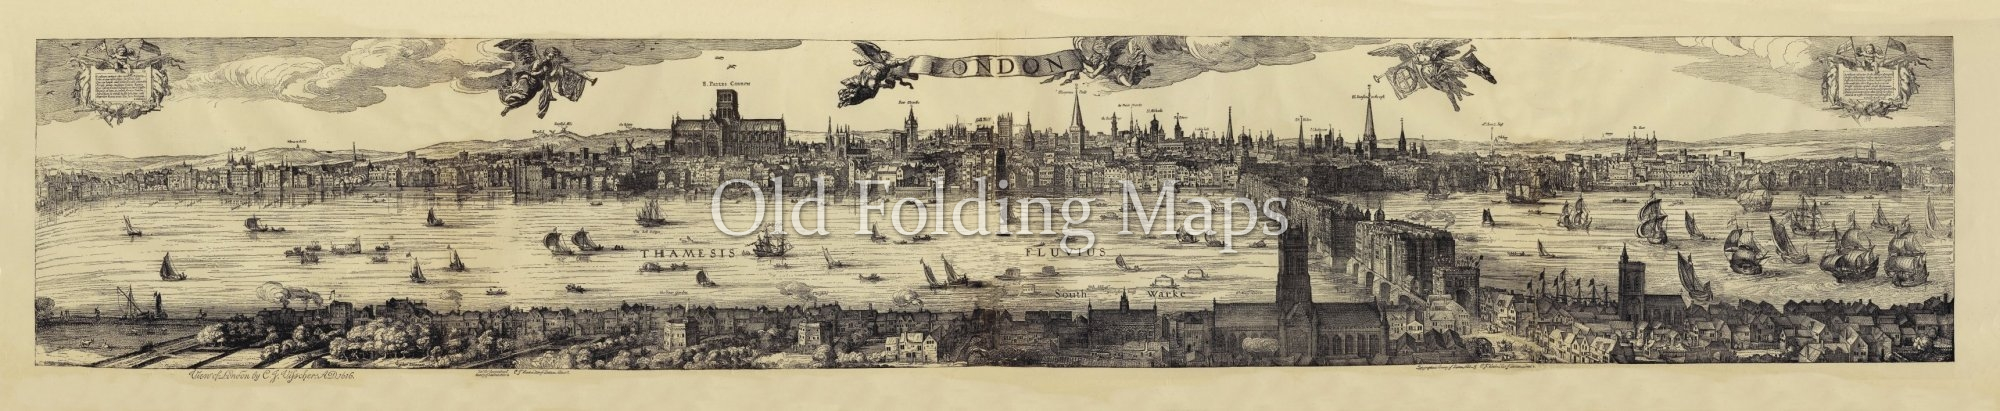 Panorama of London by Claes Jan Visscher circa 1616 reproduction print laid on cloth